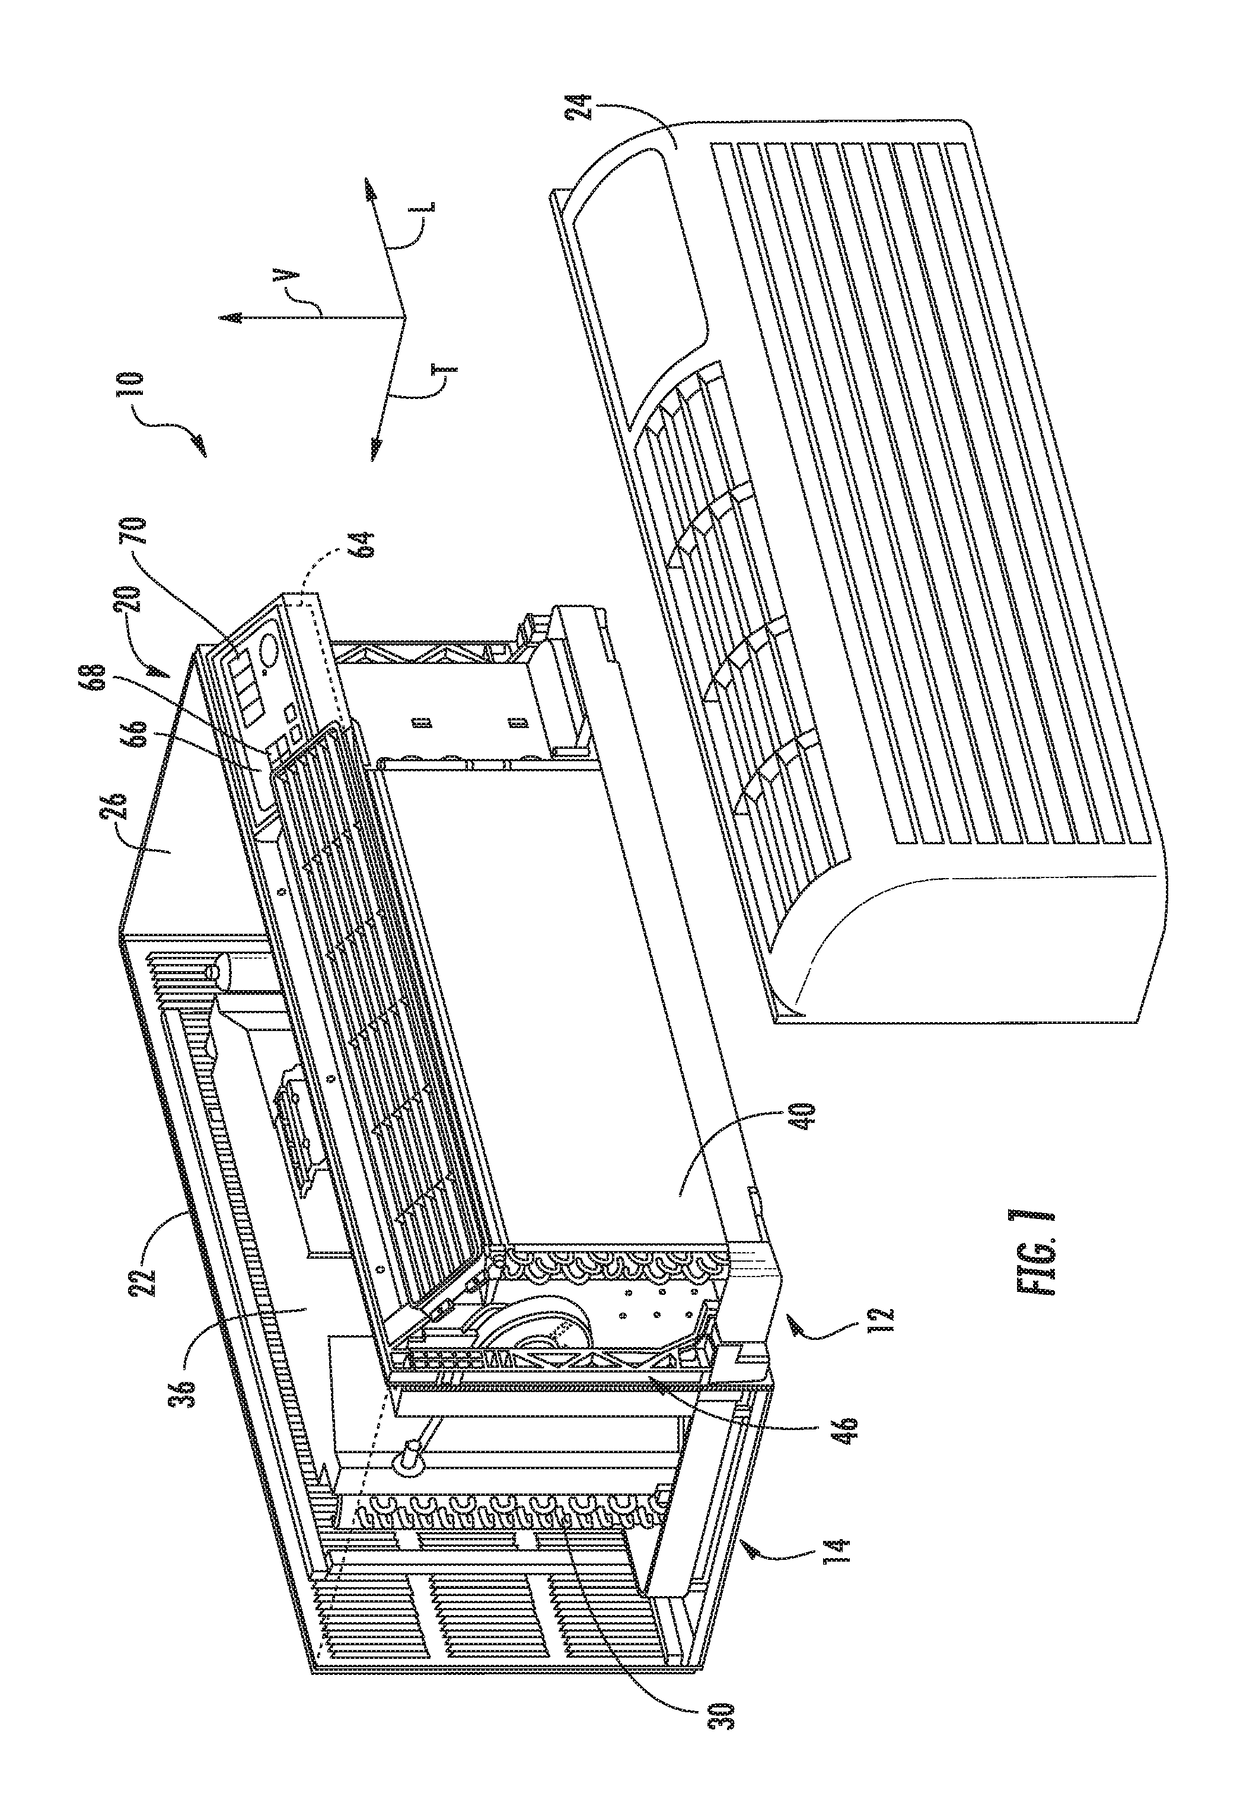 System and method for operating a packaged terminal air conditioner unit